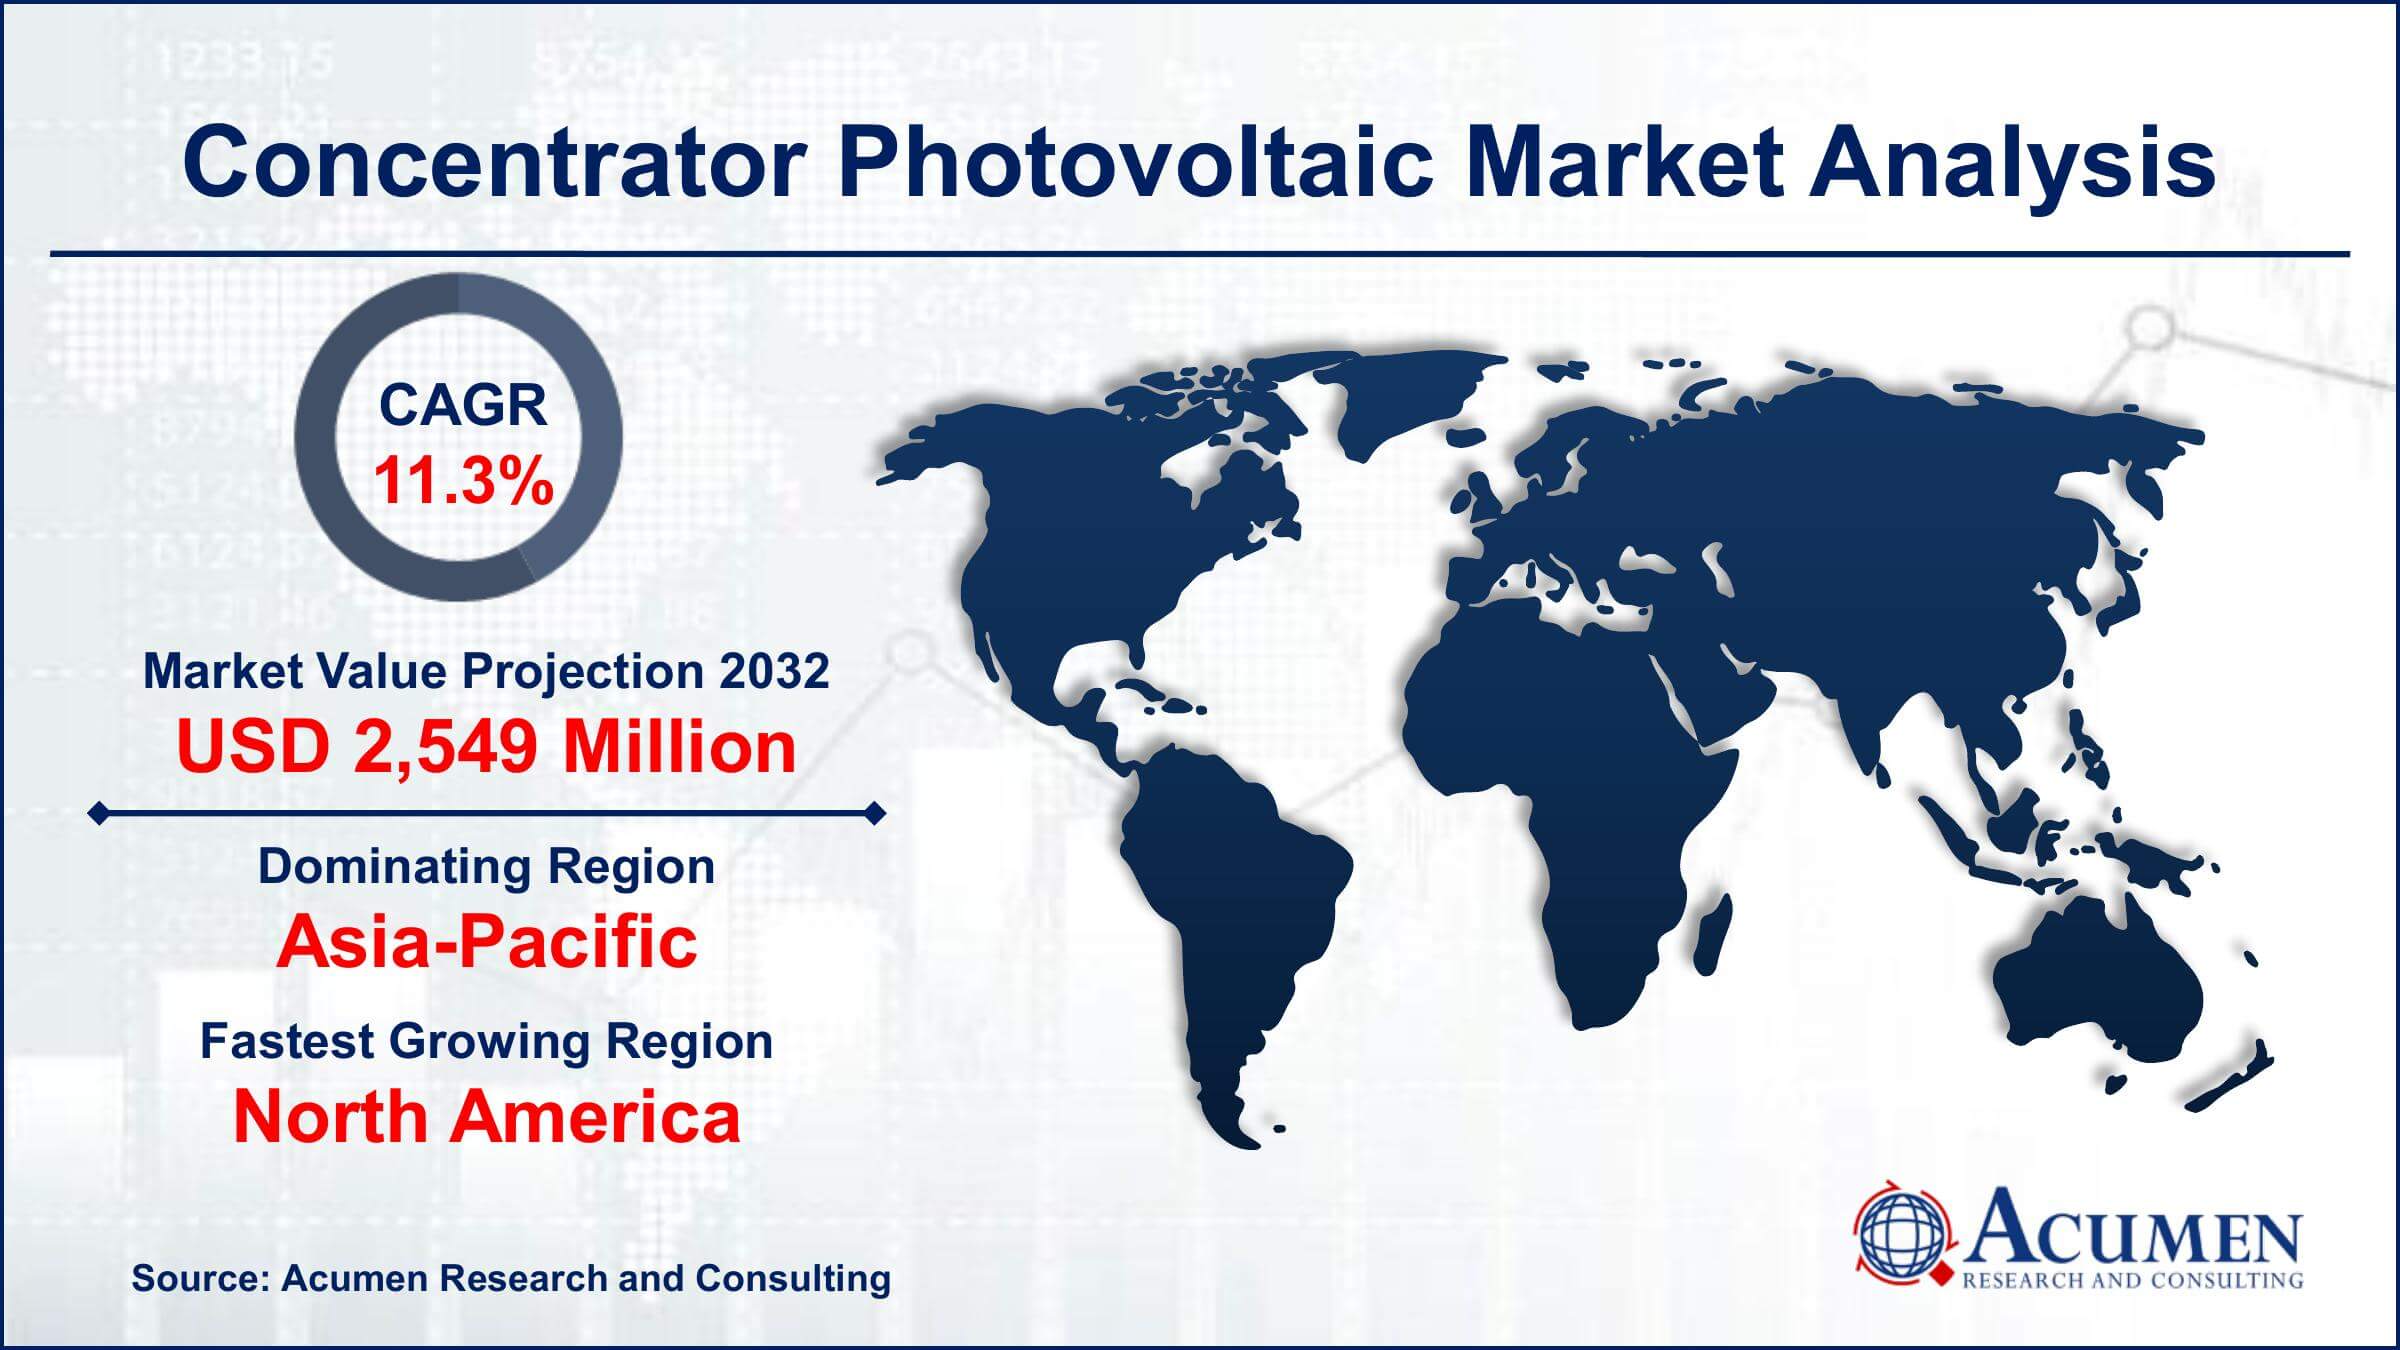 Global Concentrator Photovoltaic Market Trends